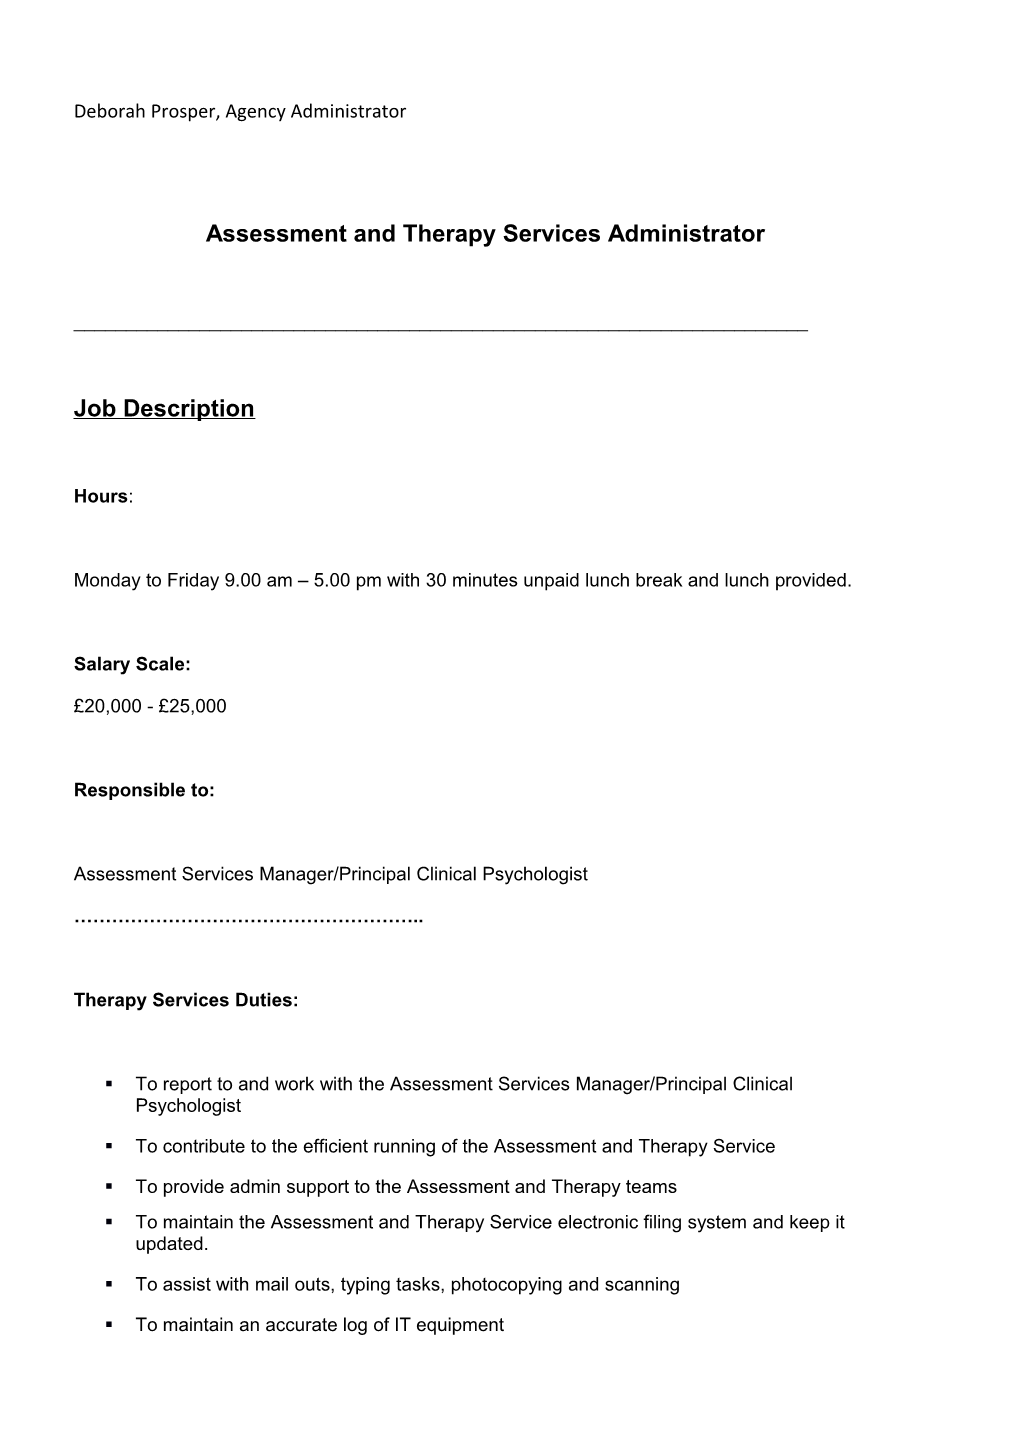 Assessment & Therapy Services Administrator